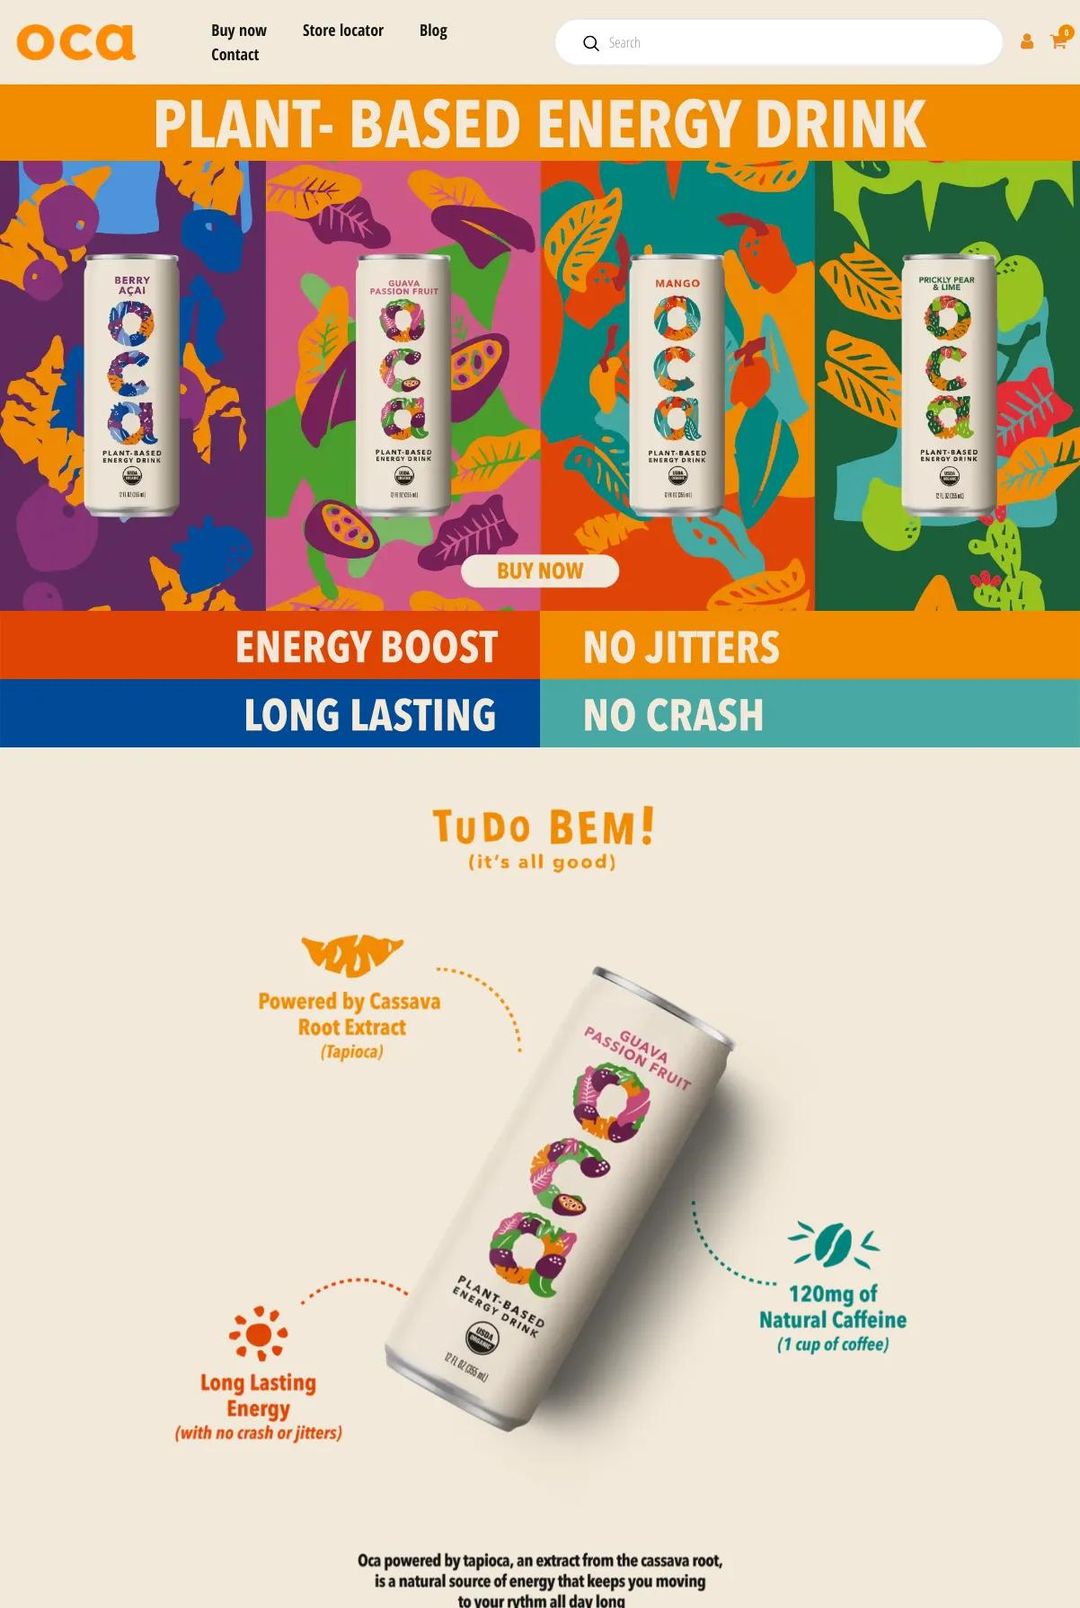 Screenshot 1 of OCA Plant Based Energy Drink (Example Shopify Food and Beverage Website)